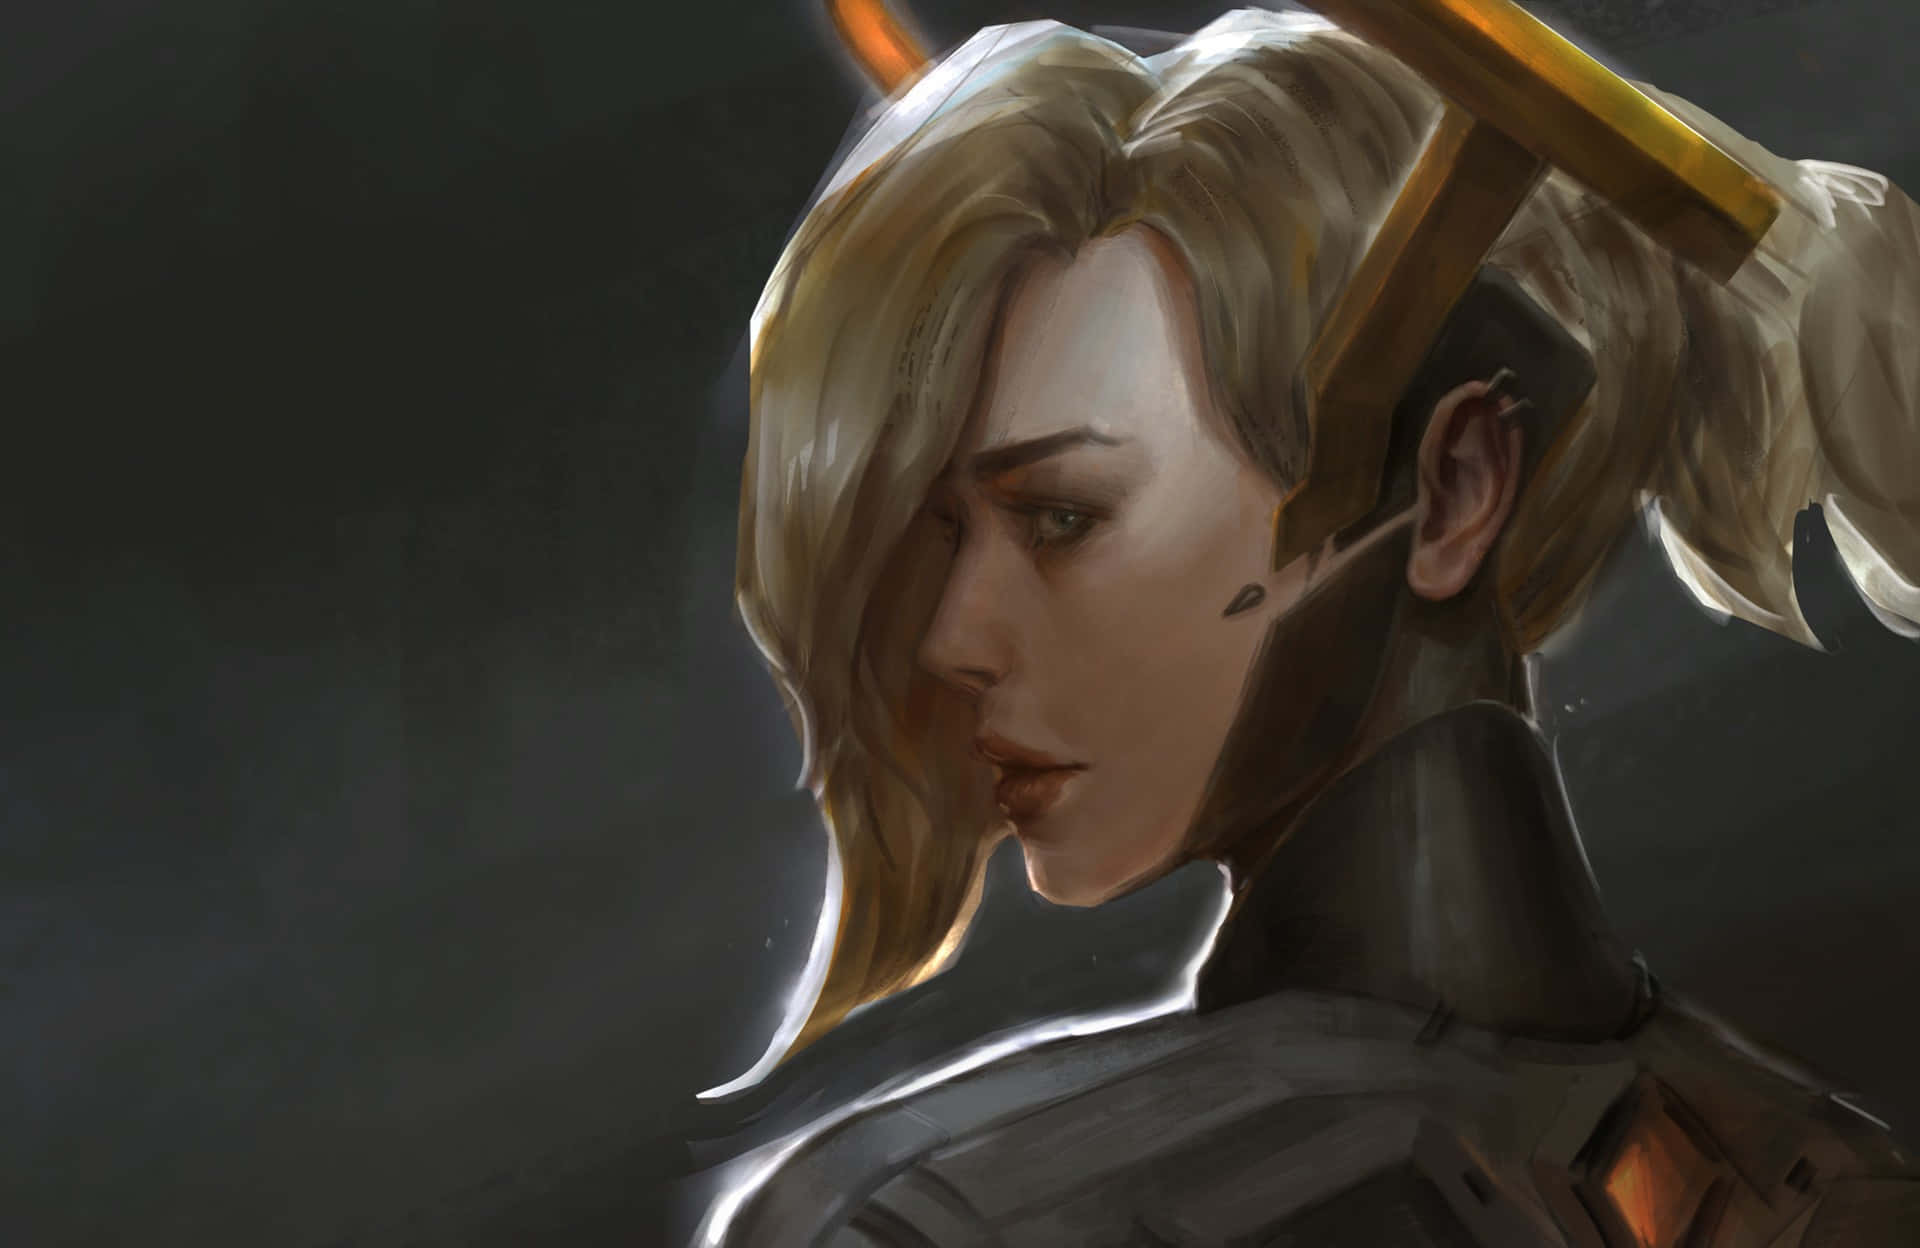 Soaring High With Overwatch's Mercy